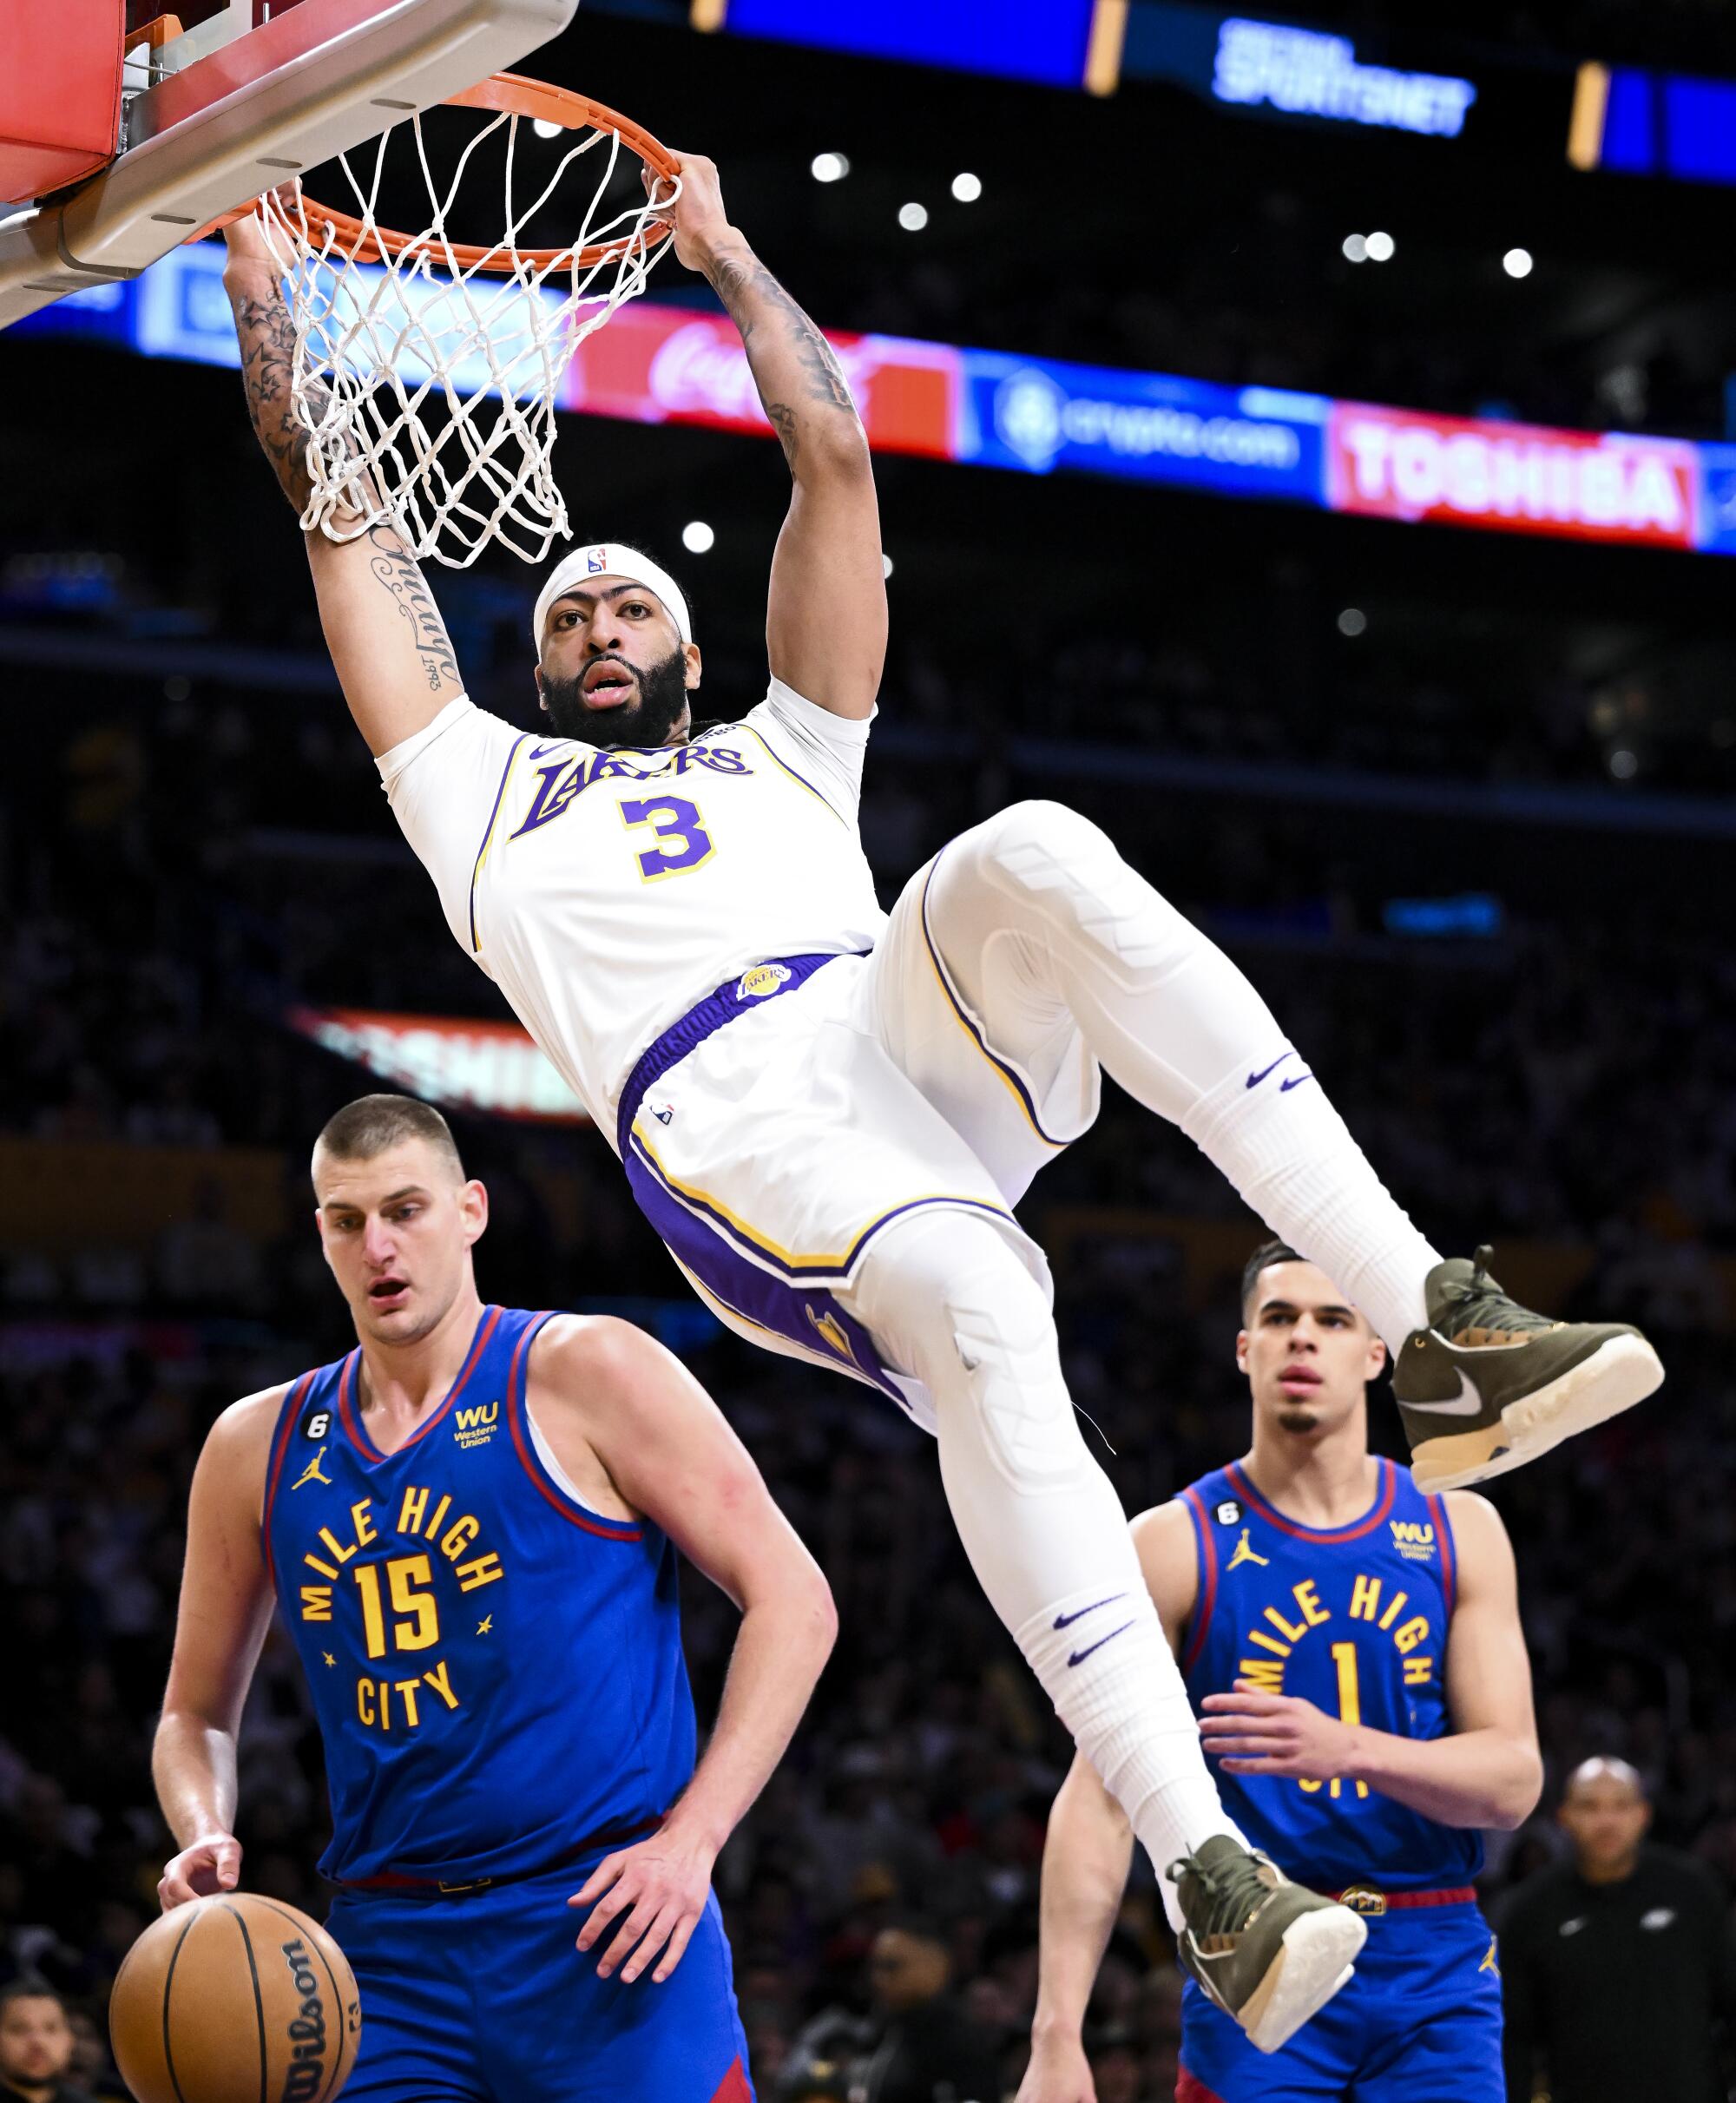 Lakers forward Anthony Davis hangs onto the rim after he dunks the ball in front of Nuggets center Nikola Jokic.